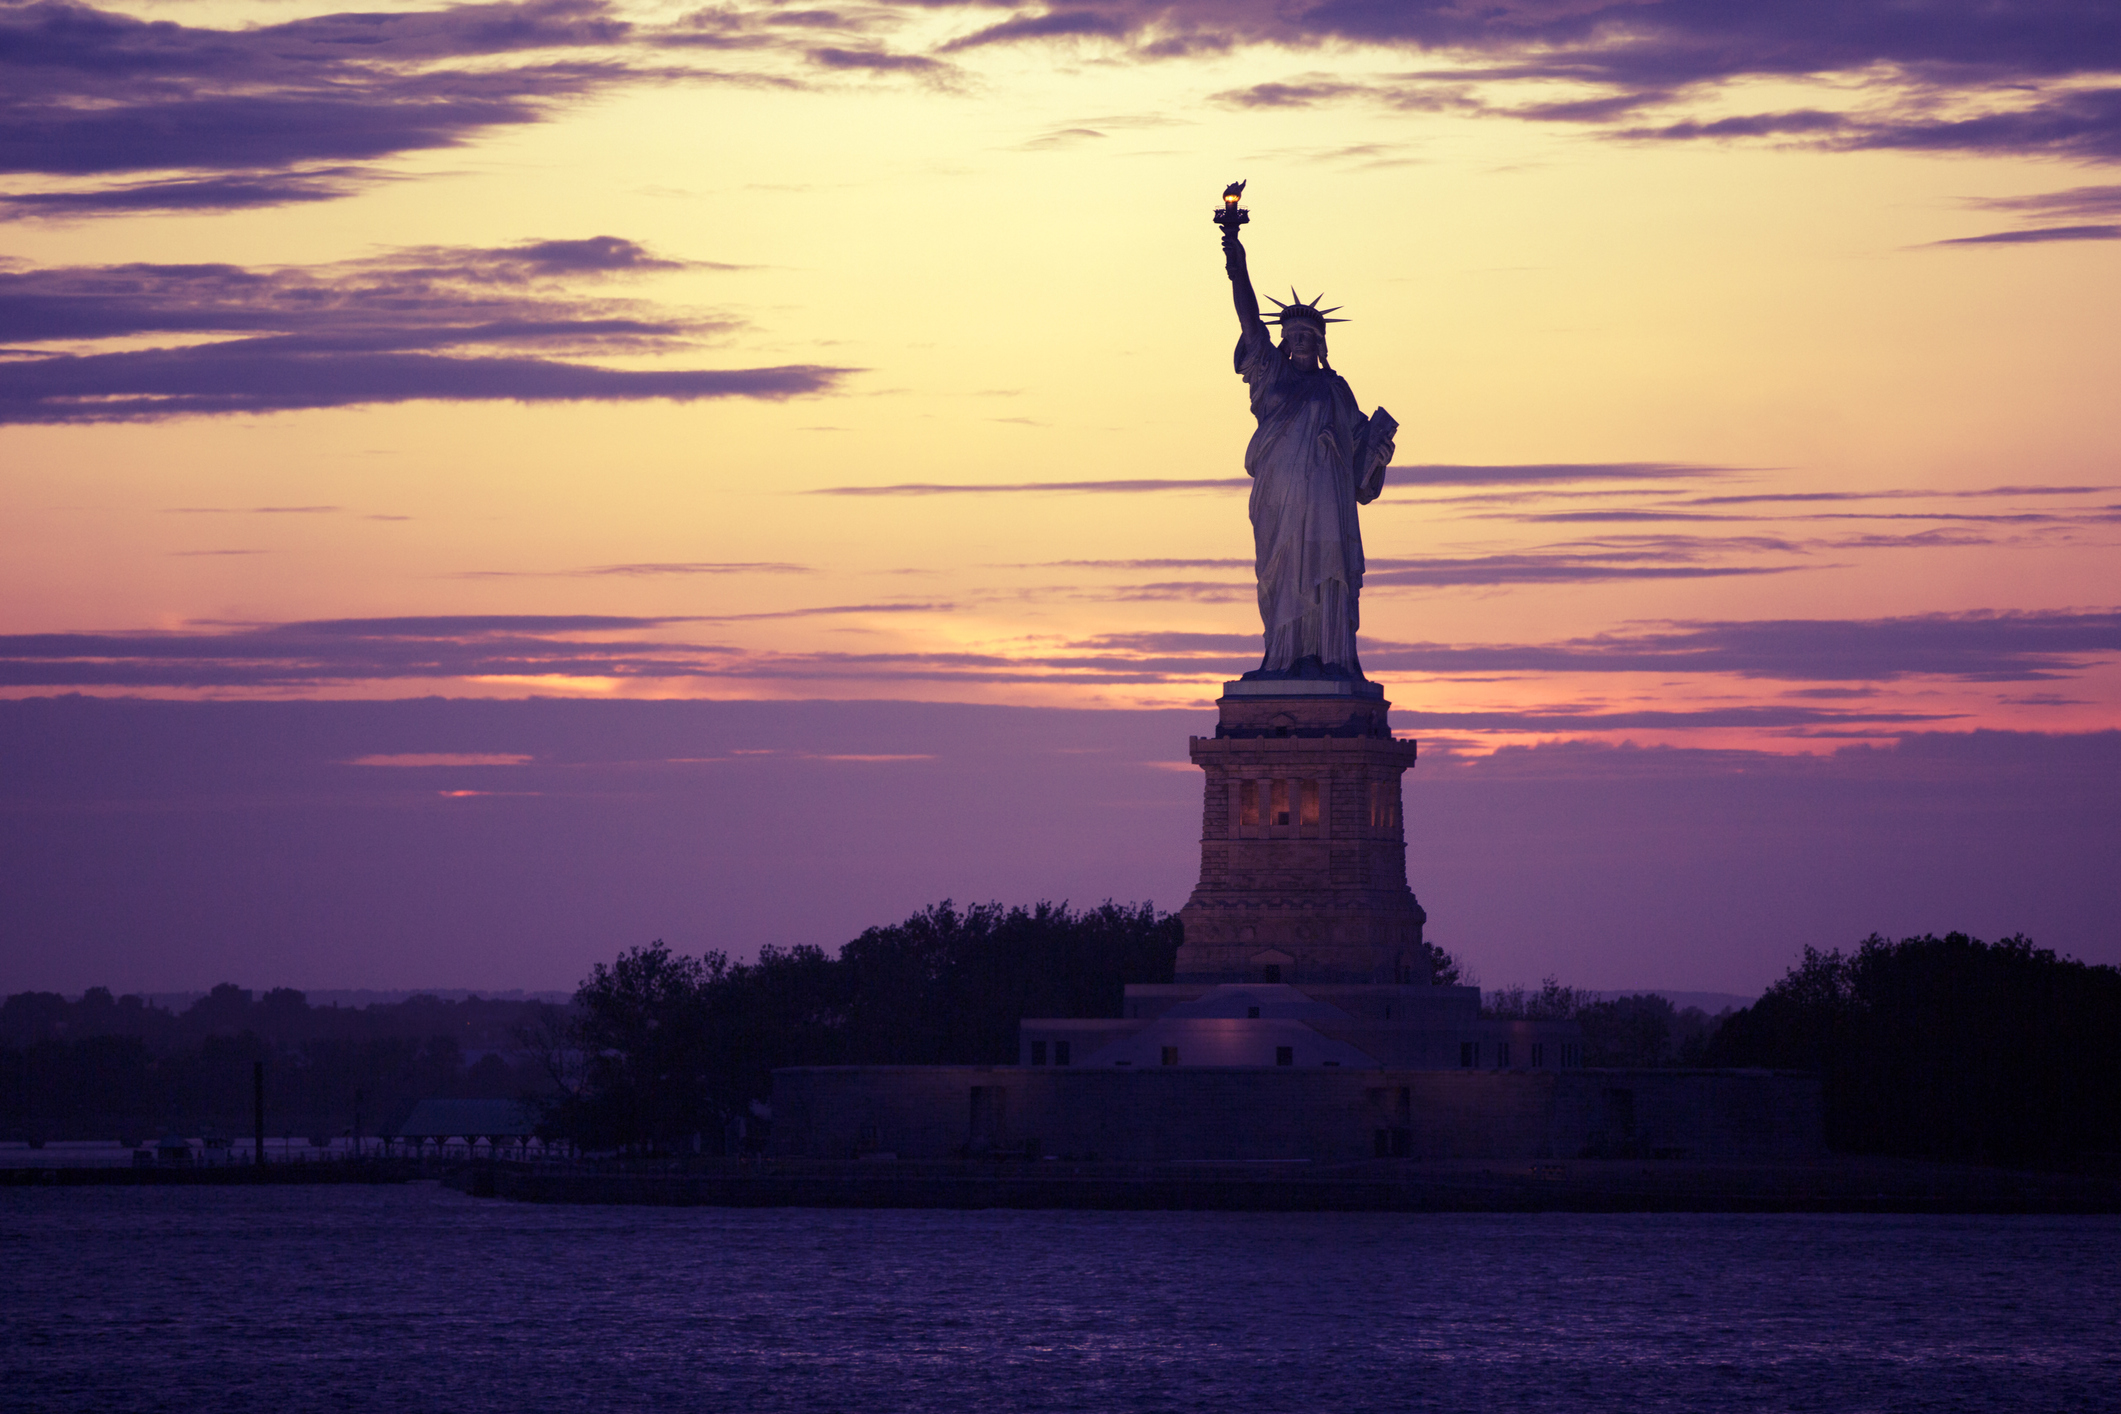 Statue of Liberty framed by purple sunset